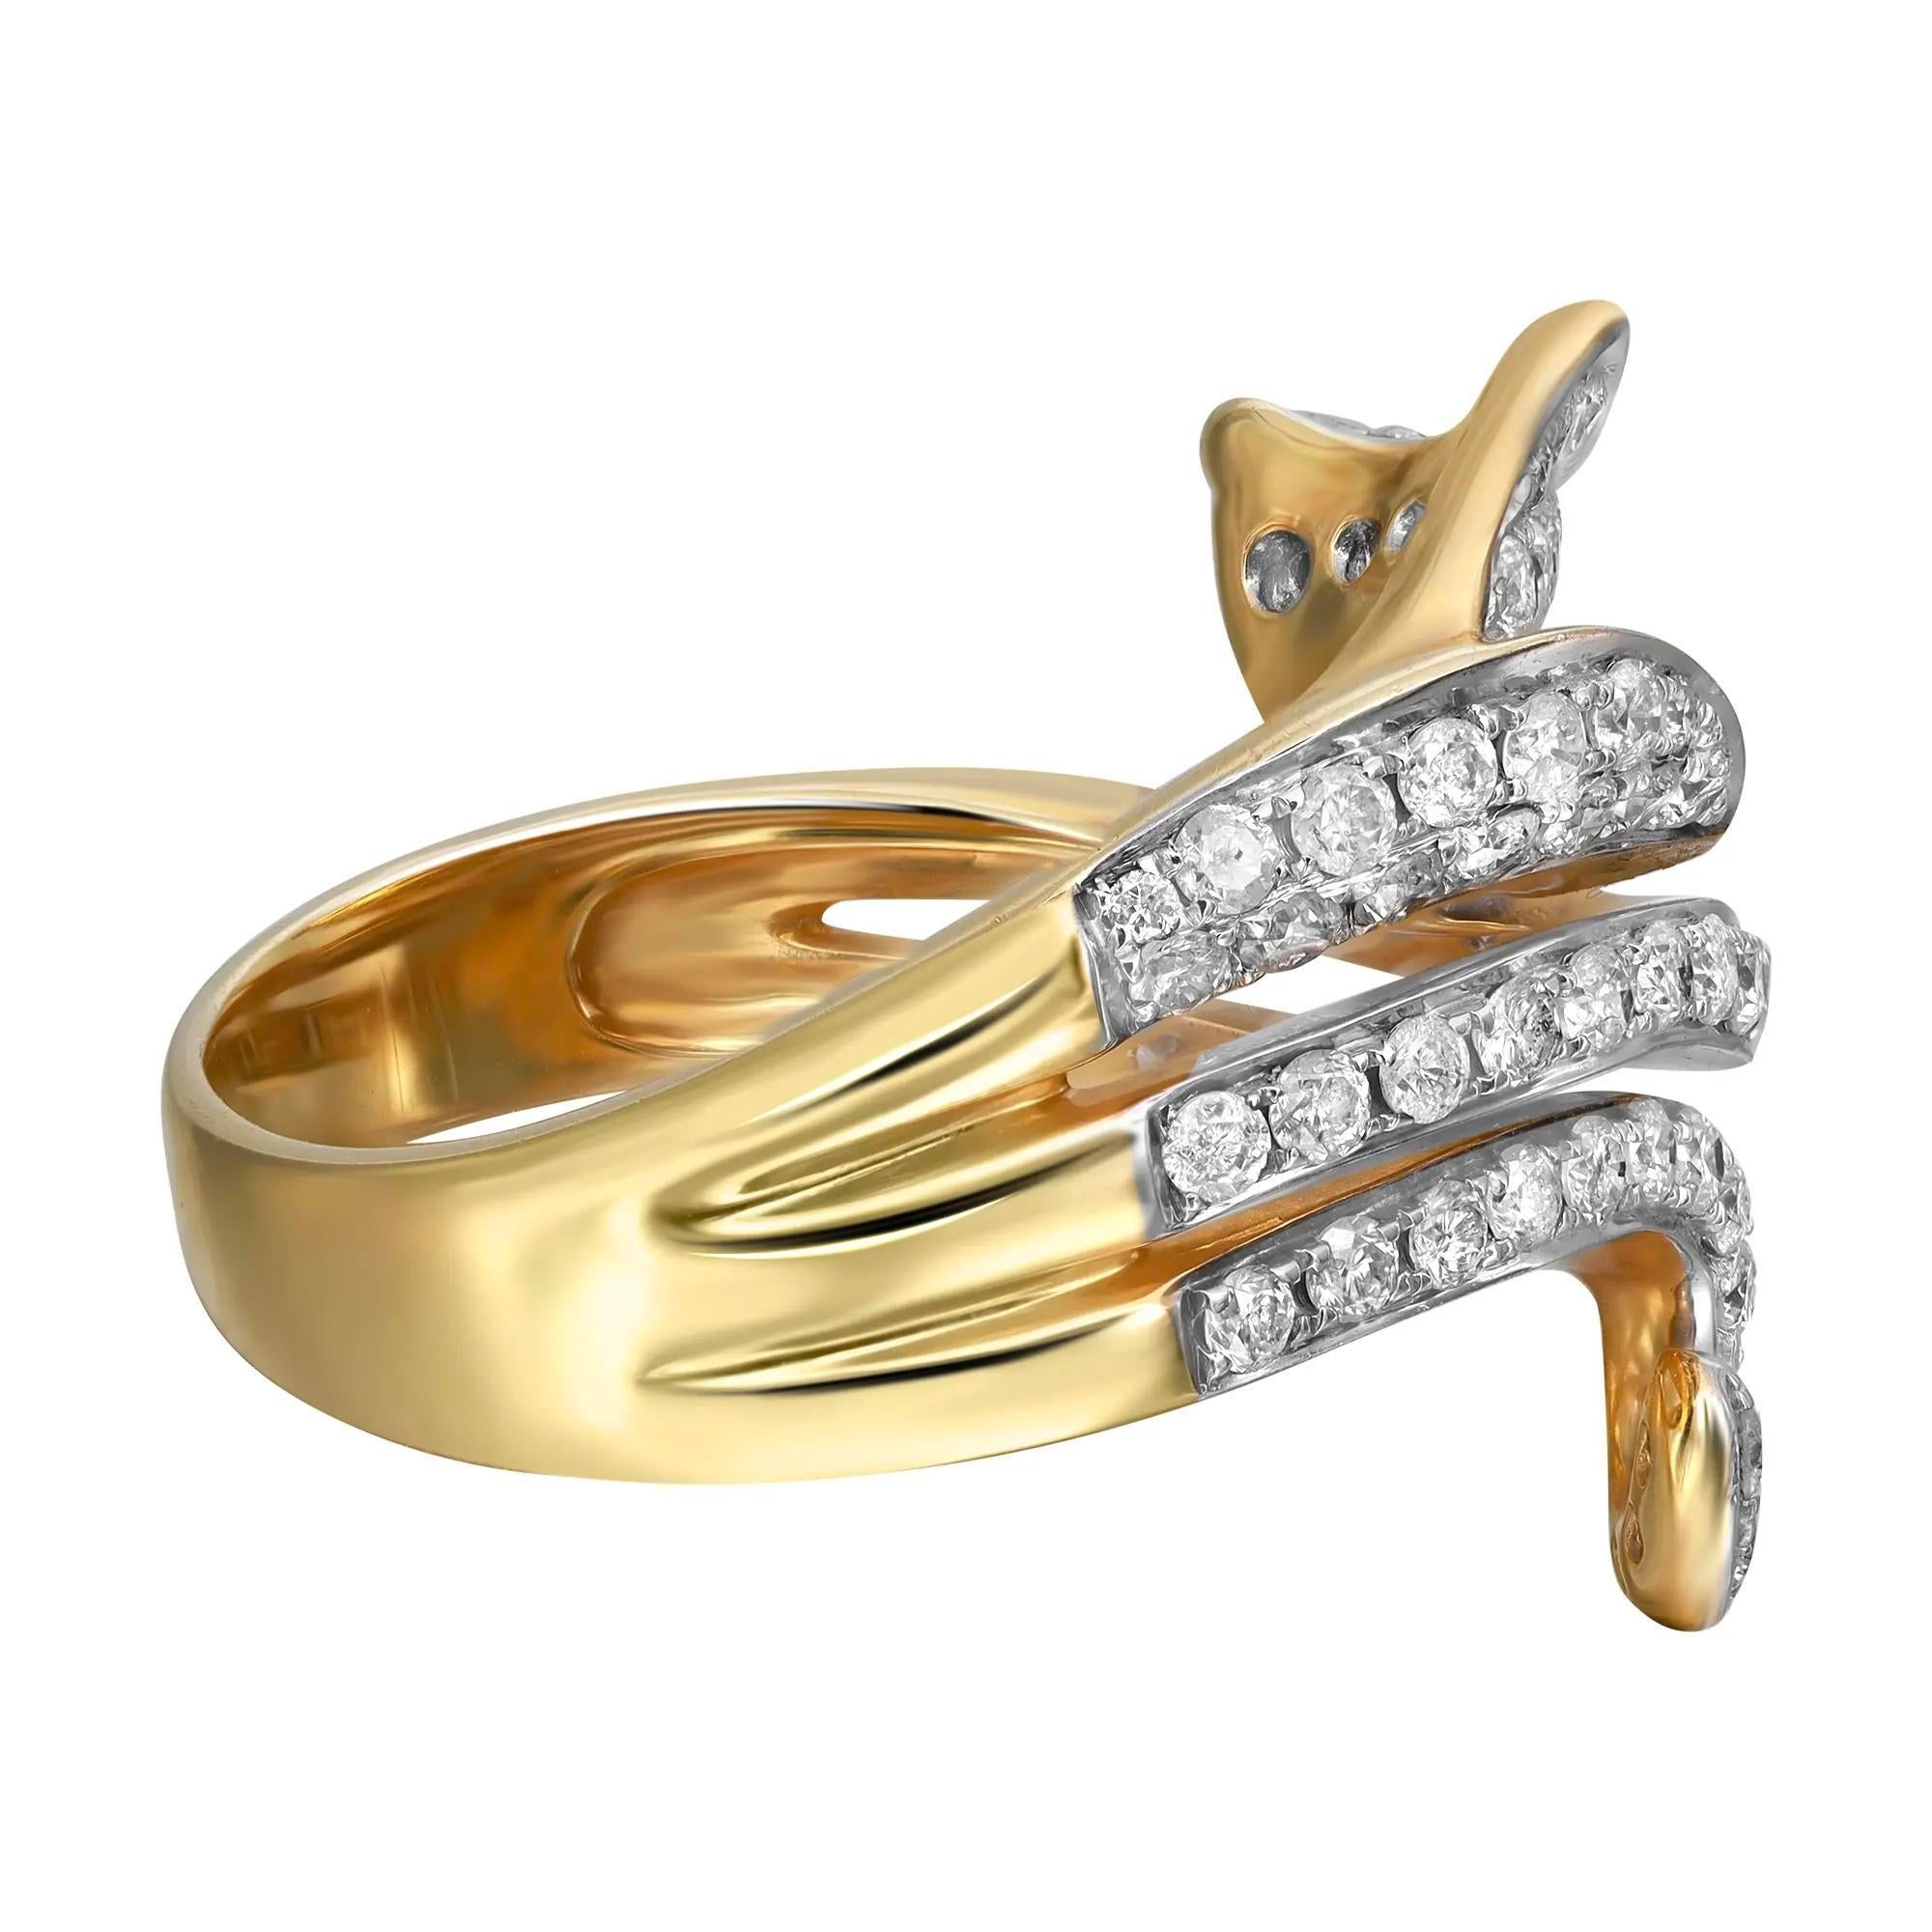 This beautiful diamond cocktail ring features shimmering round brilliant cut diamonds in prong setting with a beautiful leaf design. Total diamond weight: 1.26 carats. Diamond quality: H-I color and SI clarity. Crafted in 14K yellow gold. The ring